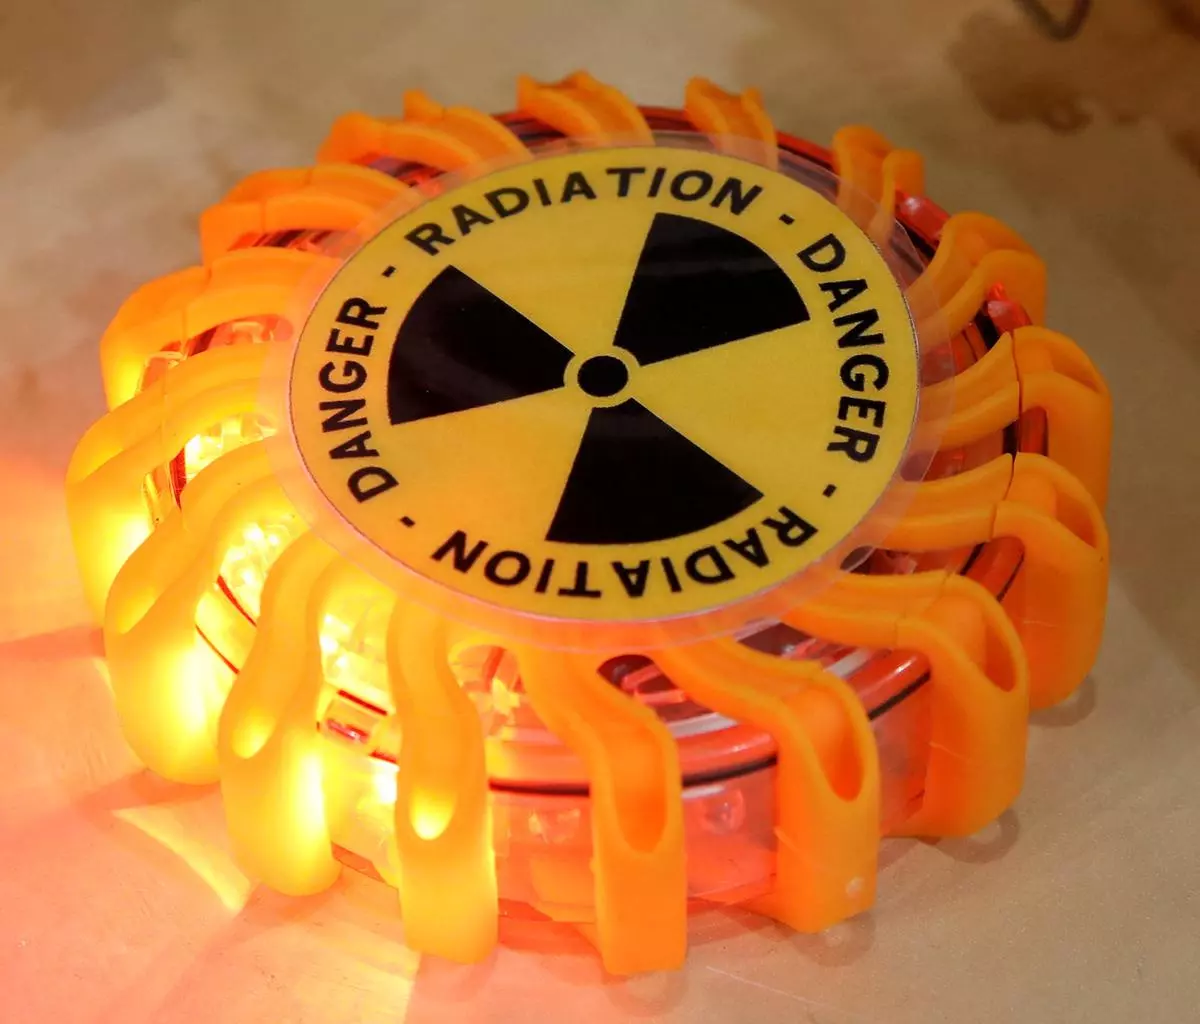 FILE PHOTO: A radioactivity symbol is pictured 